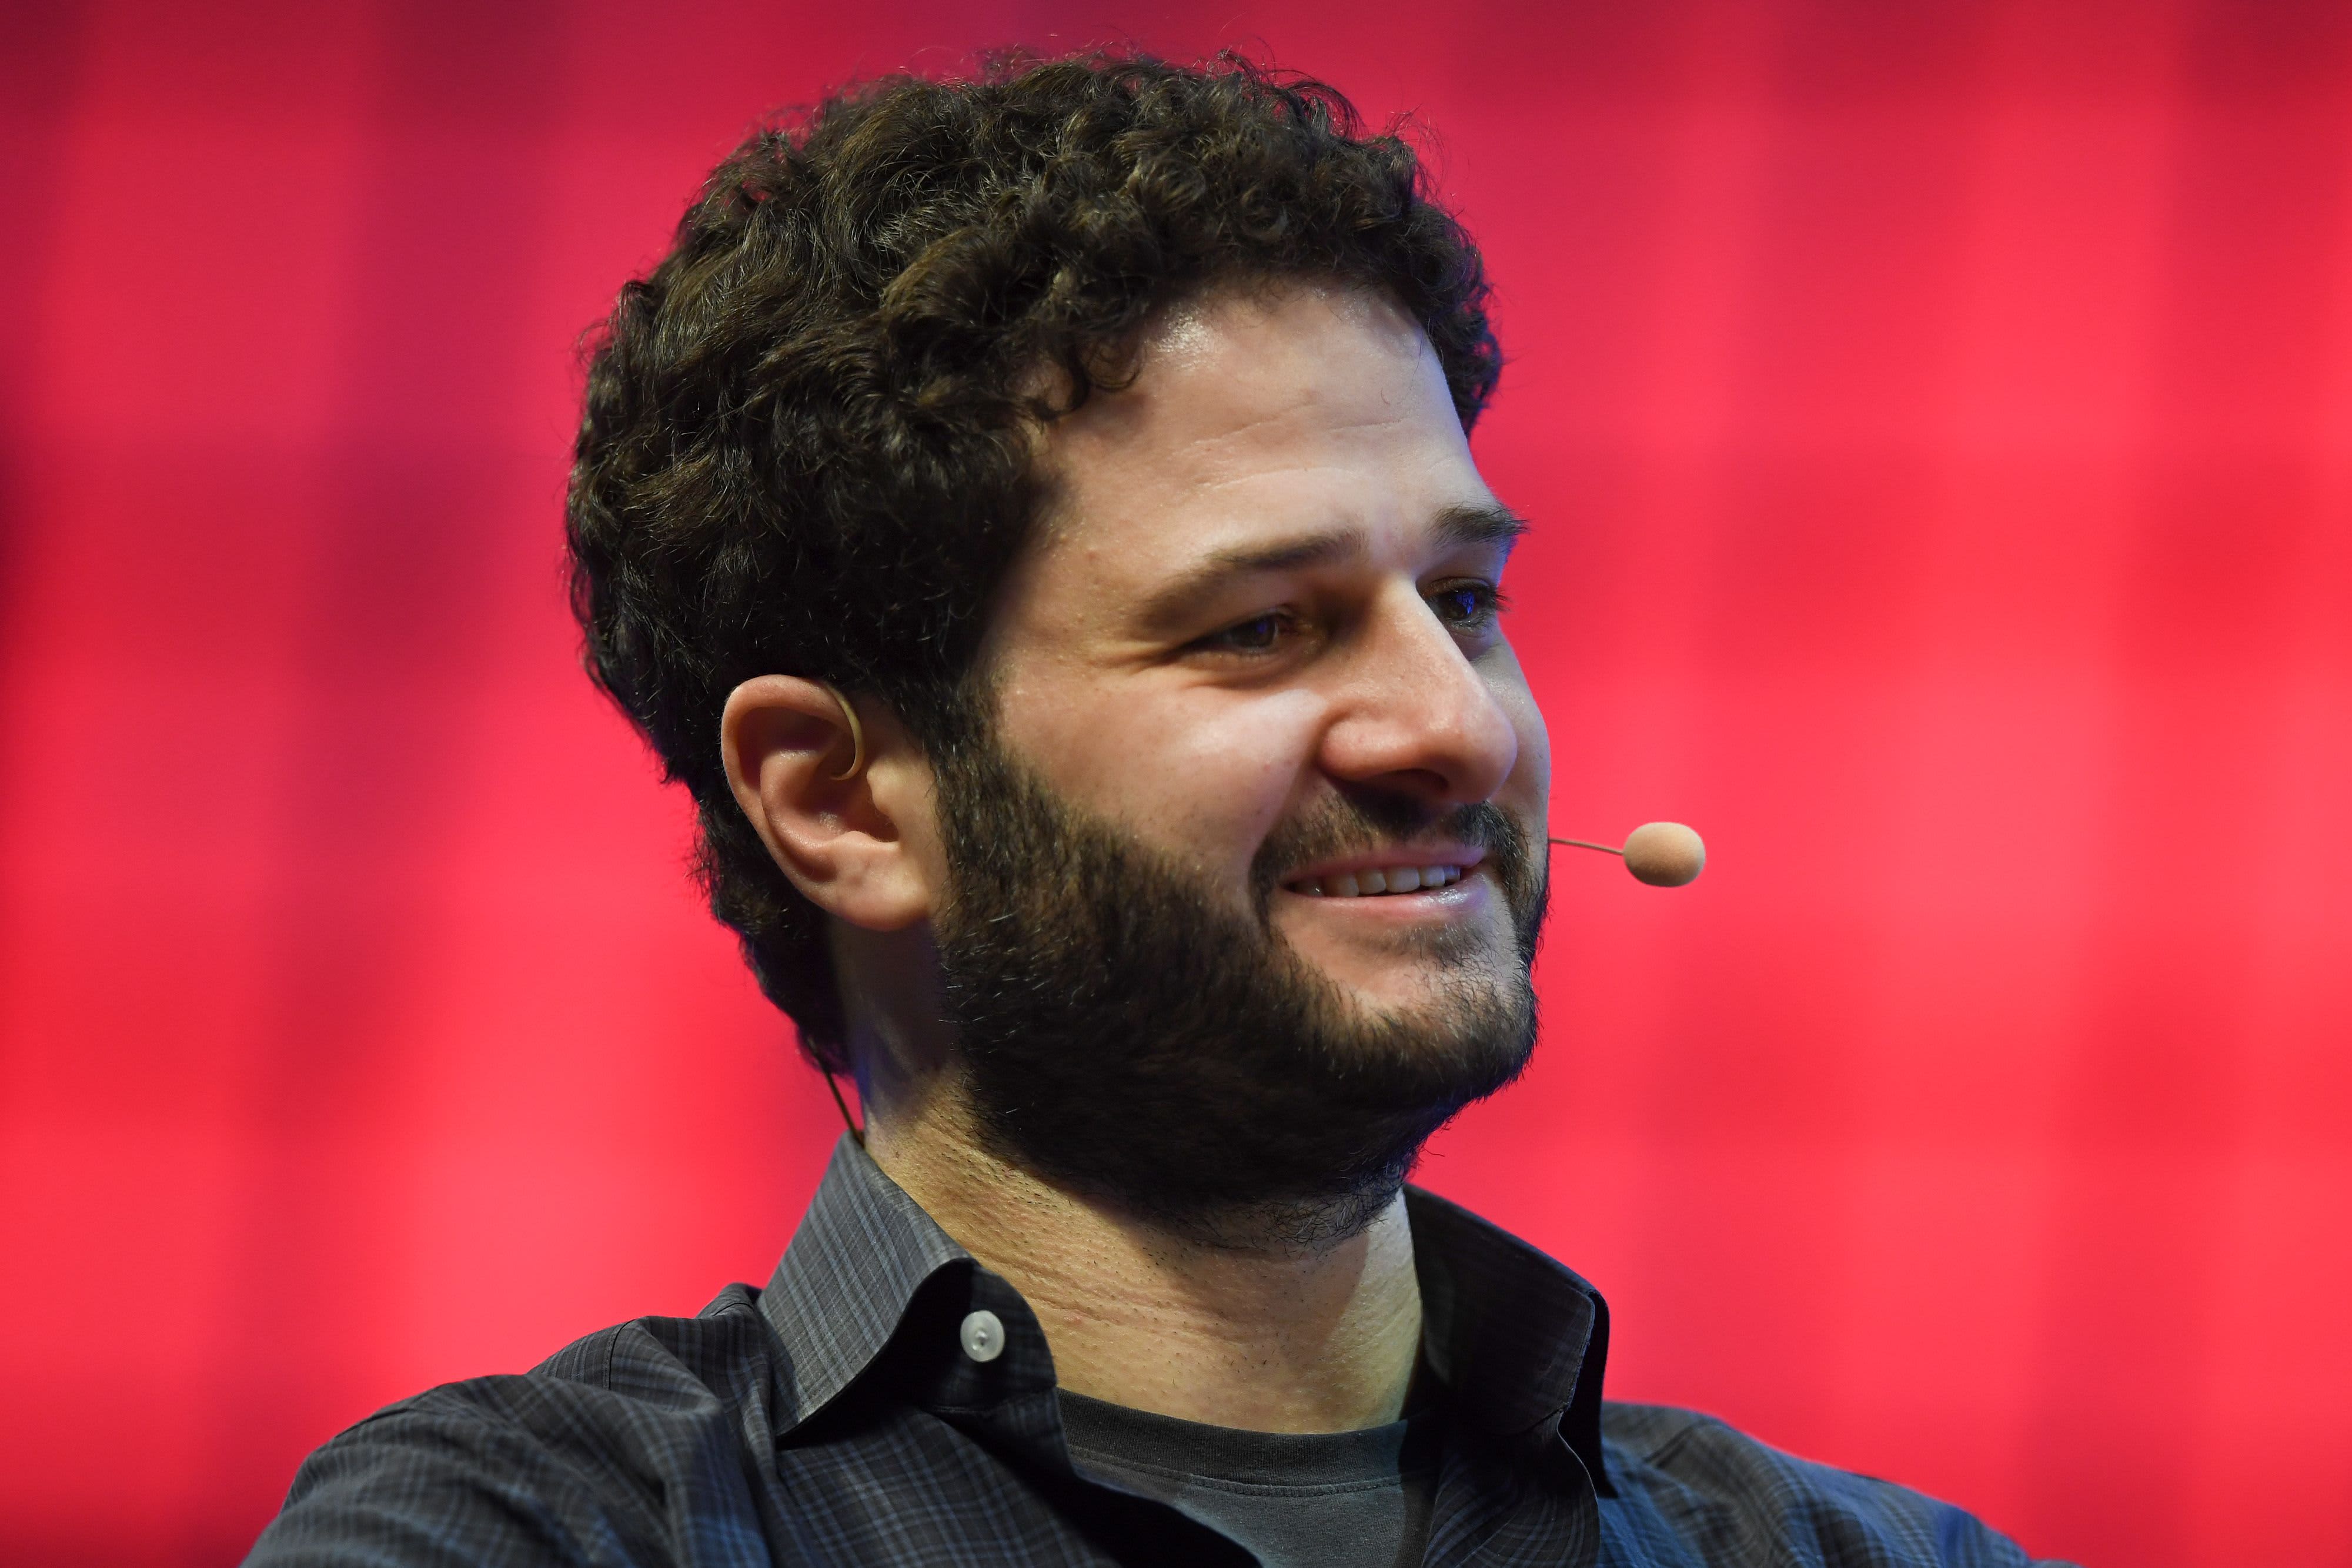 Asana CEO Dustin Moskovitz is buying the dip in a roller-coaster year